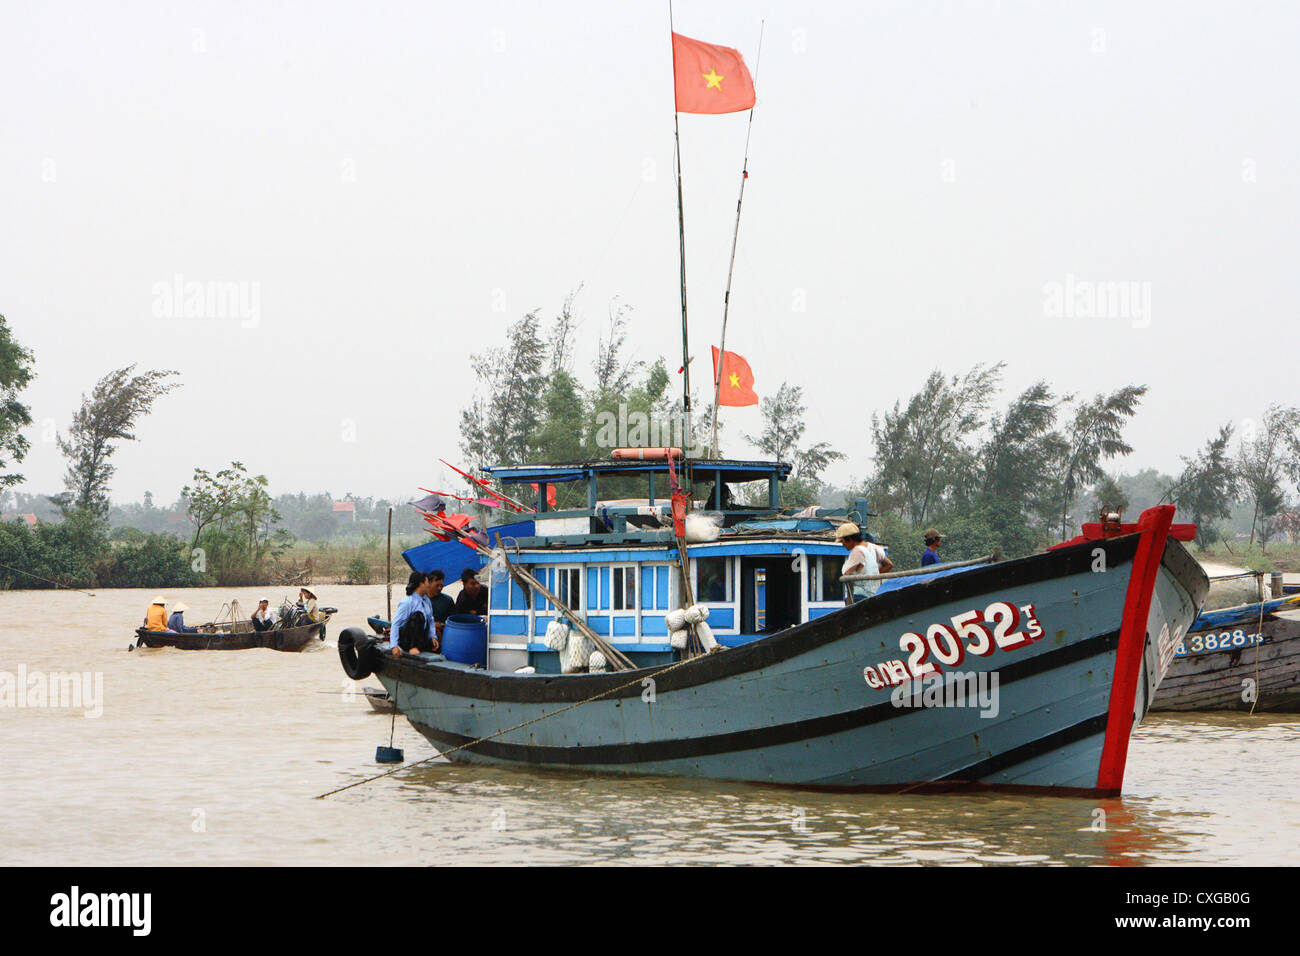 Vietnam, Vietnamese fishing boat with waving flags on the mast